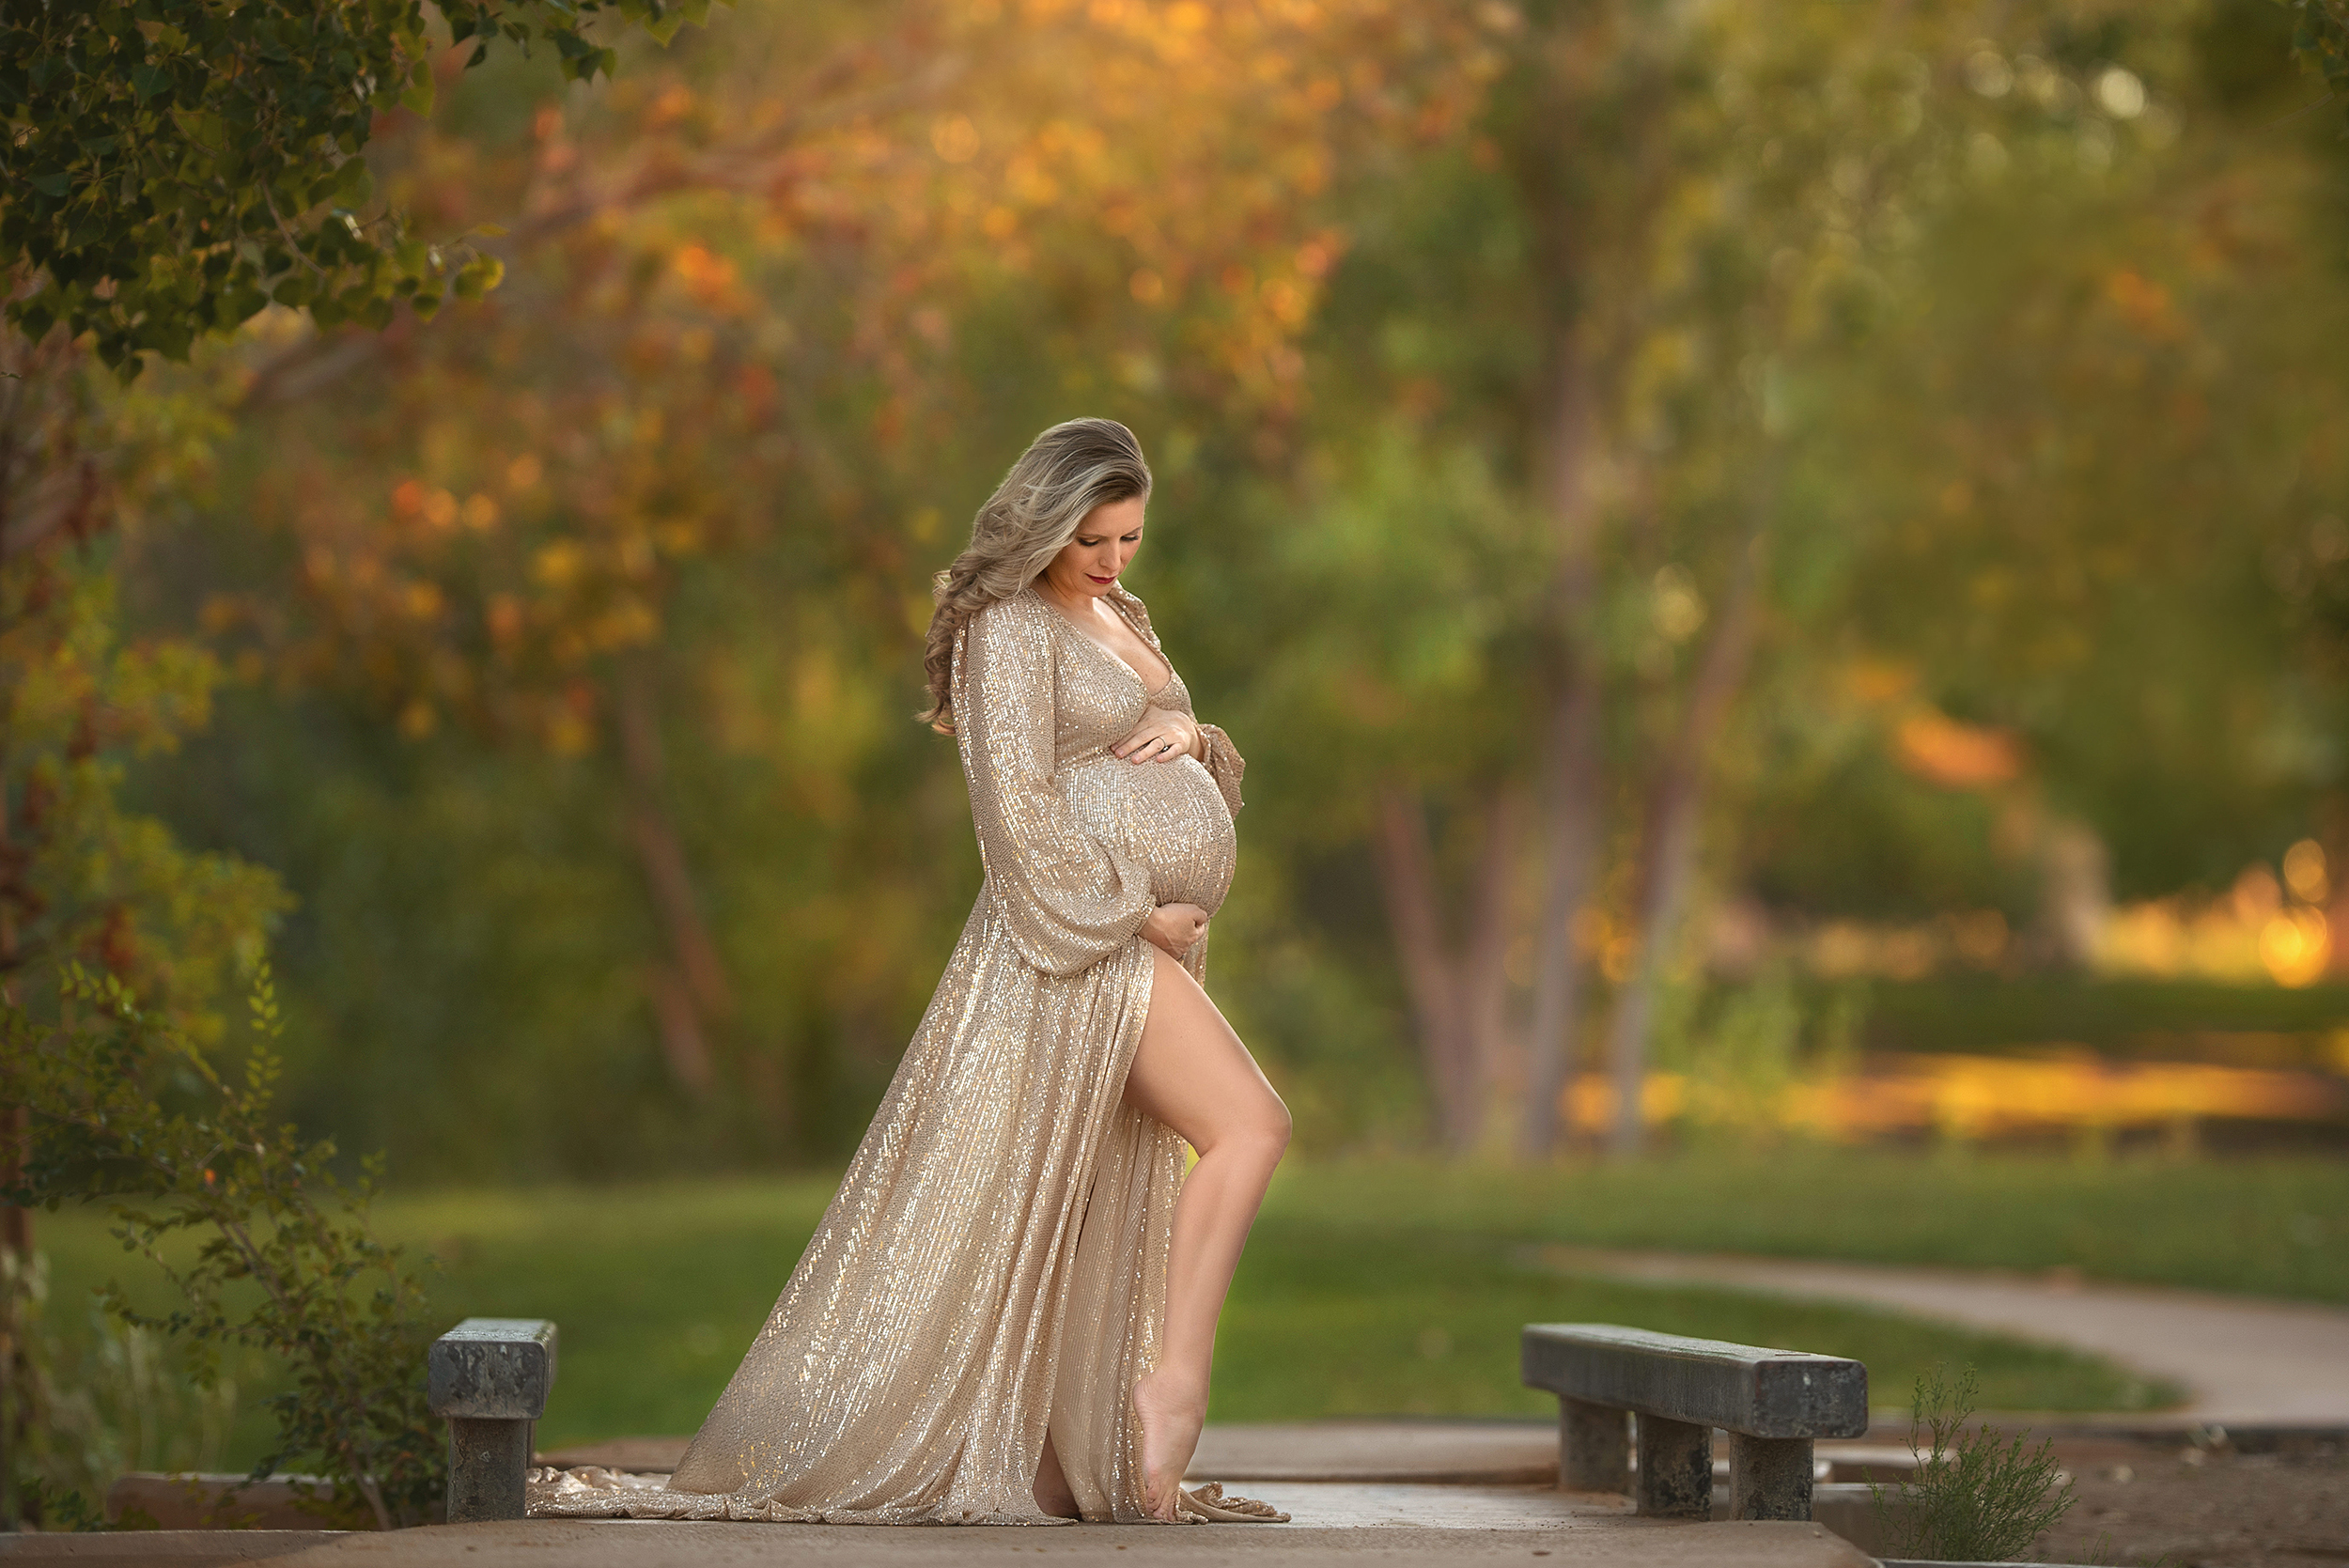 expecting mother stands holding baby bump in Sew Trendy Accessories gown at Floyd Lamb Park